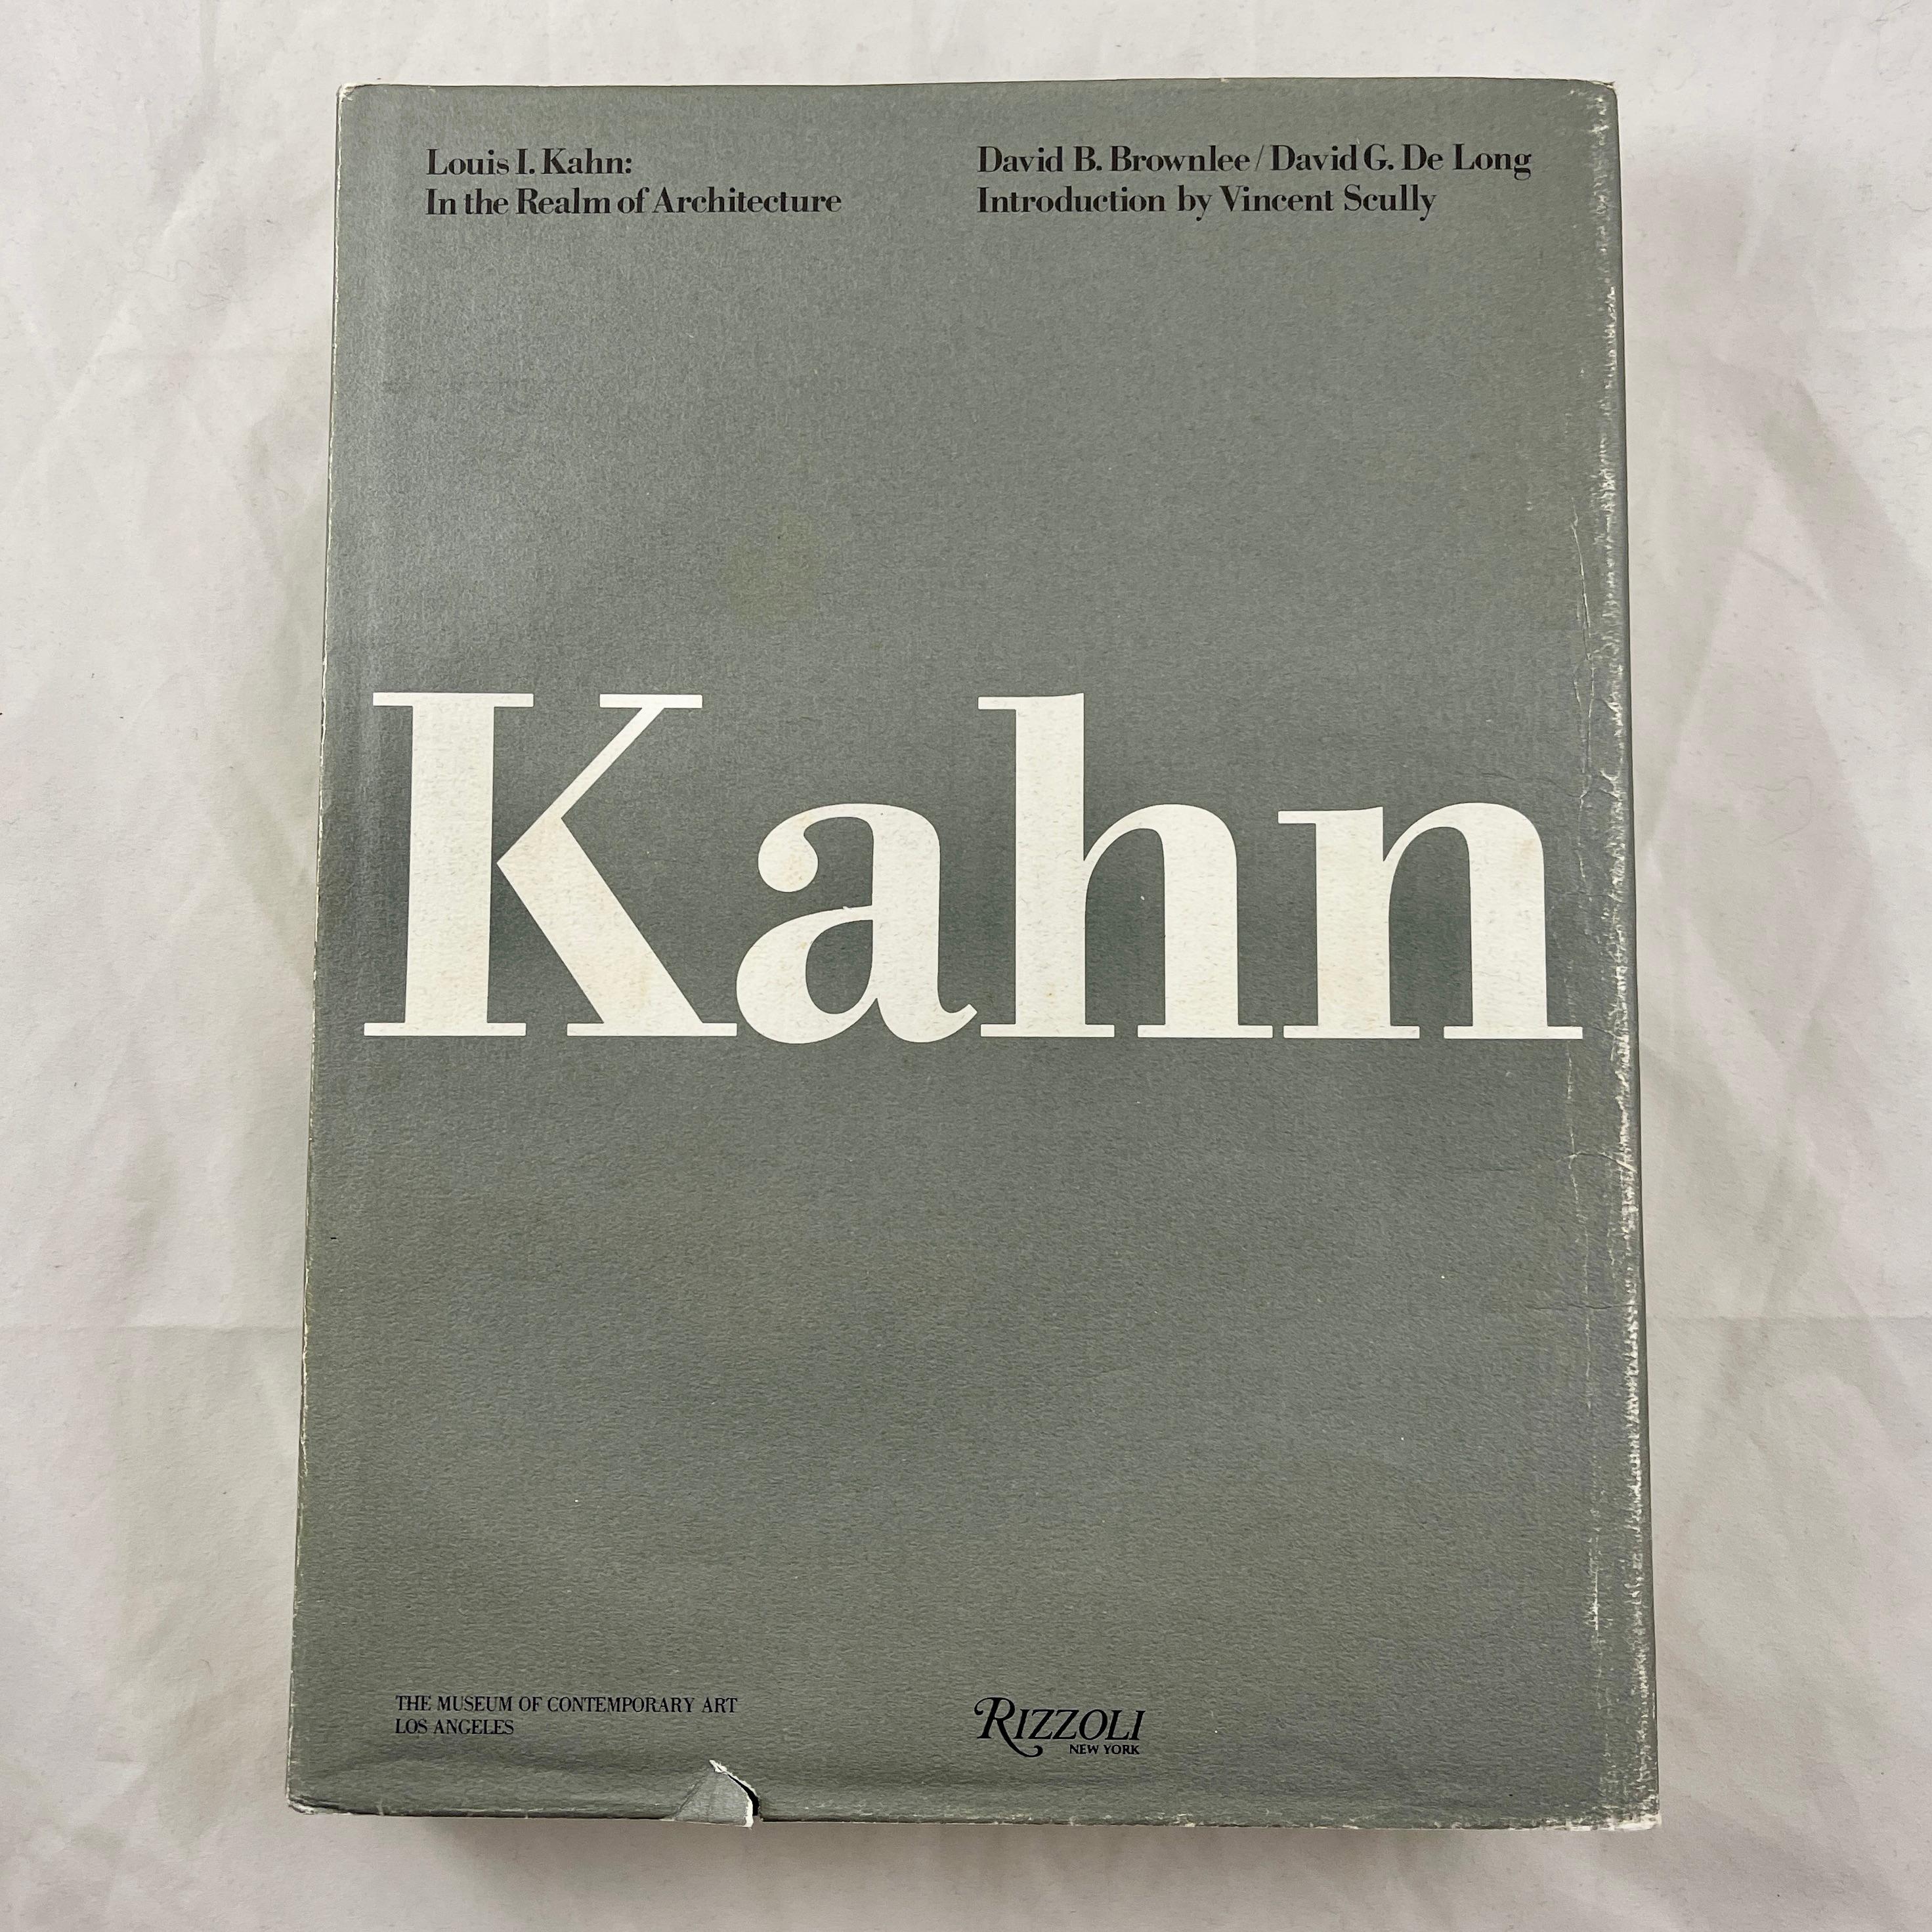 Louis i. Kahn: in the Realm of Architecture Coffee Table Book – 1st Edition 1991 4